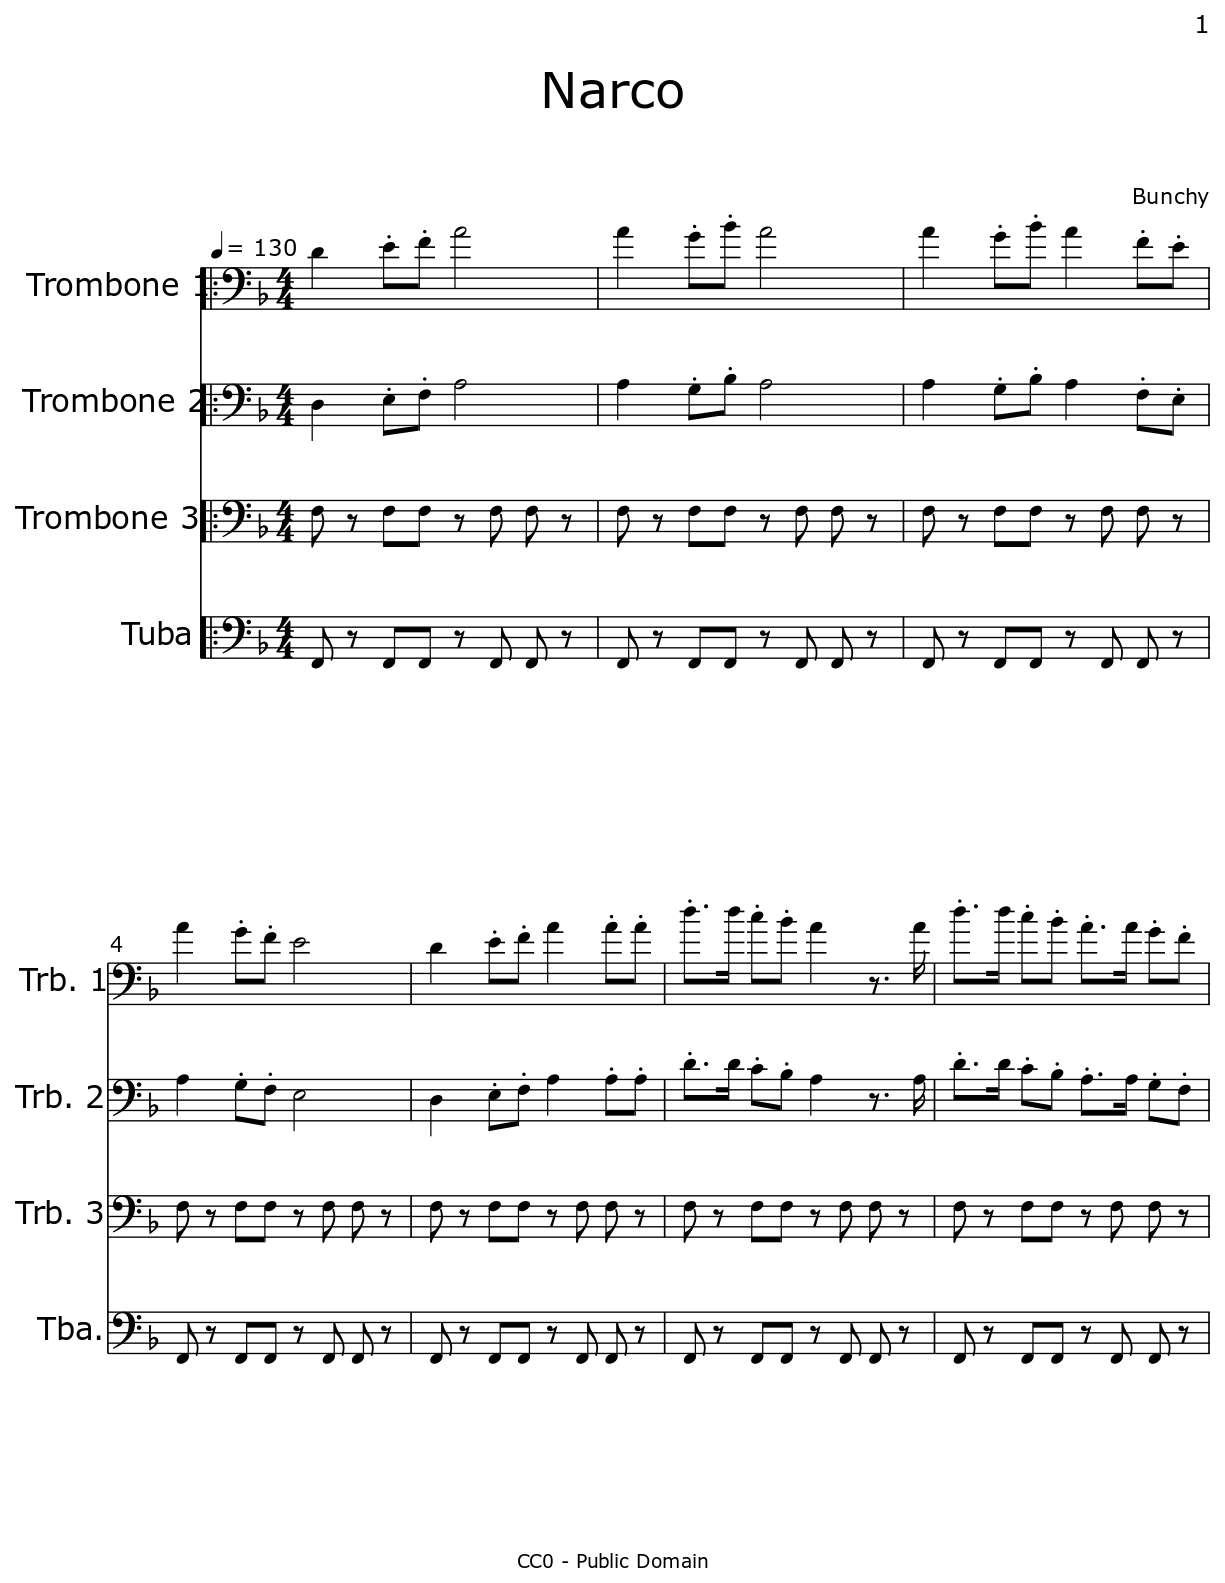 Narco - Timmy Trumpet Sheet music for Trumpet in b-flat (Solo